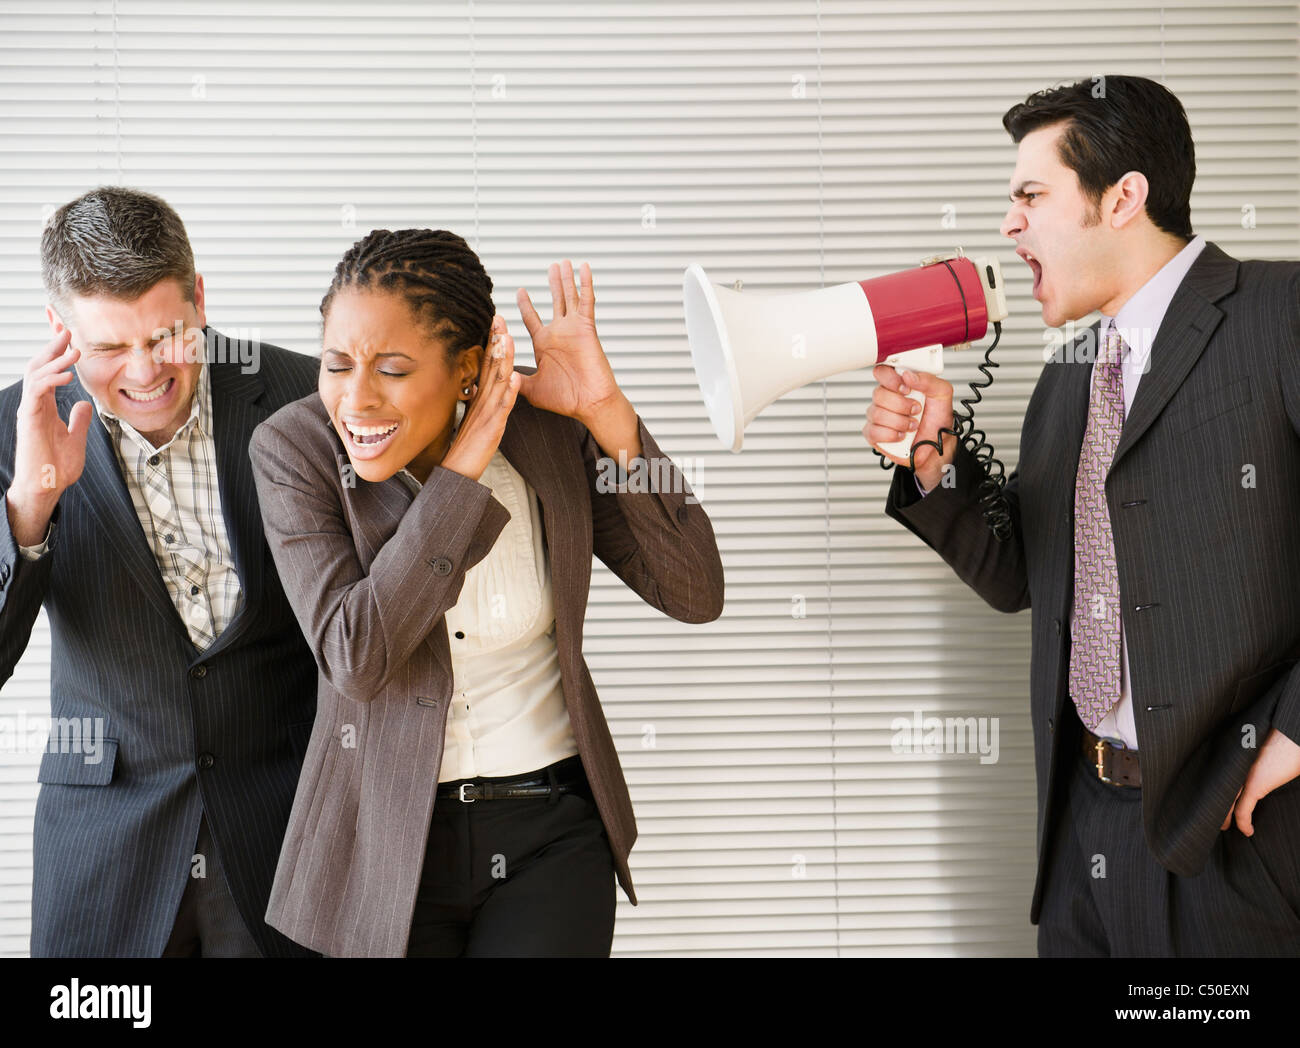 Businessman shouting through bullhorn at co-workers Stock Photo